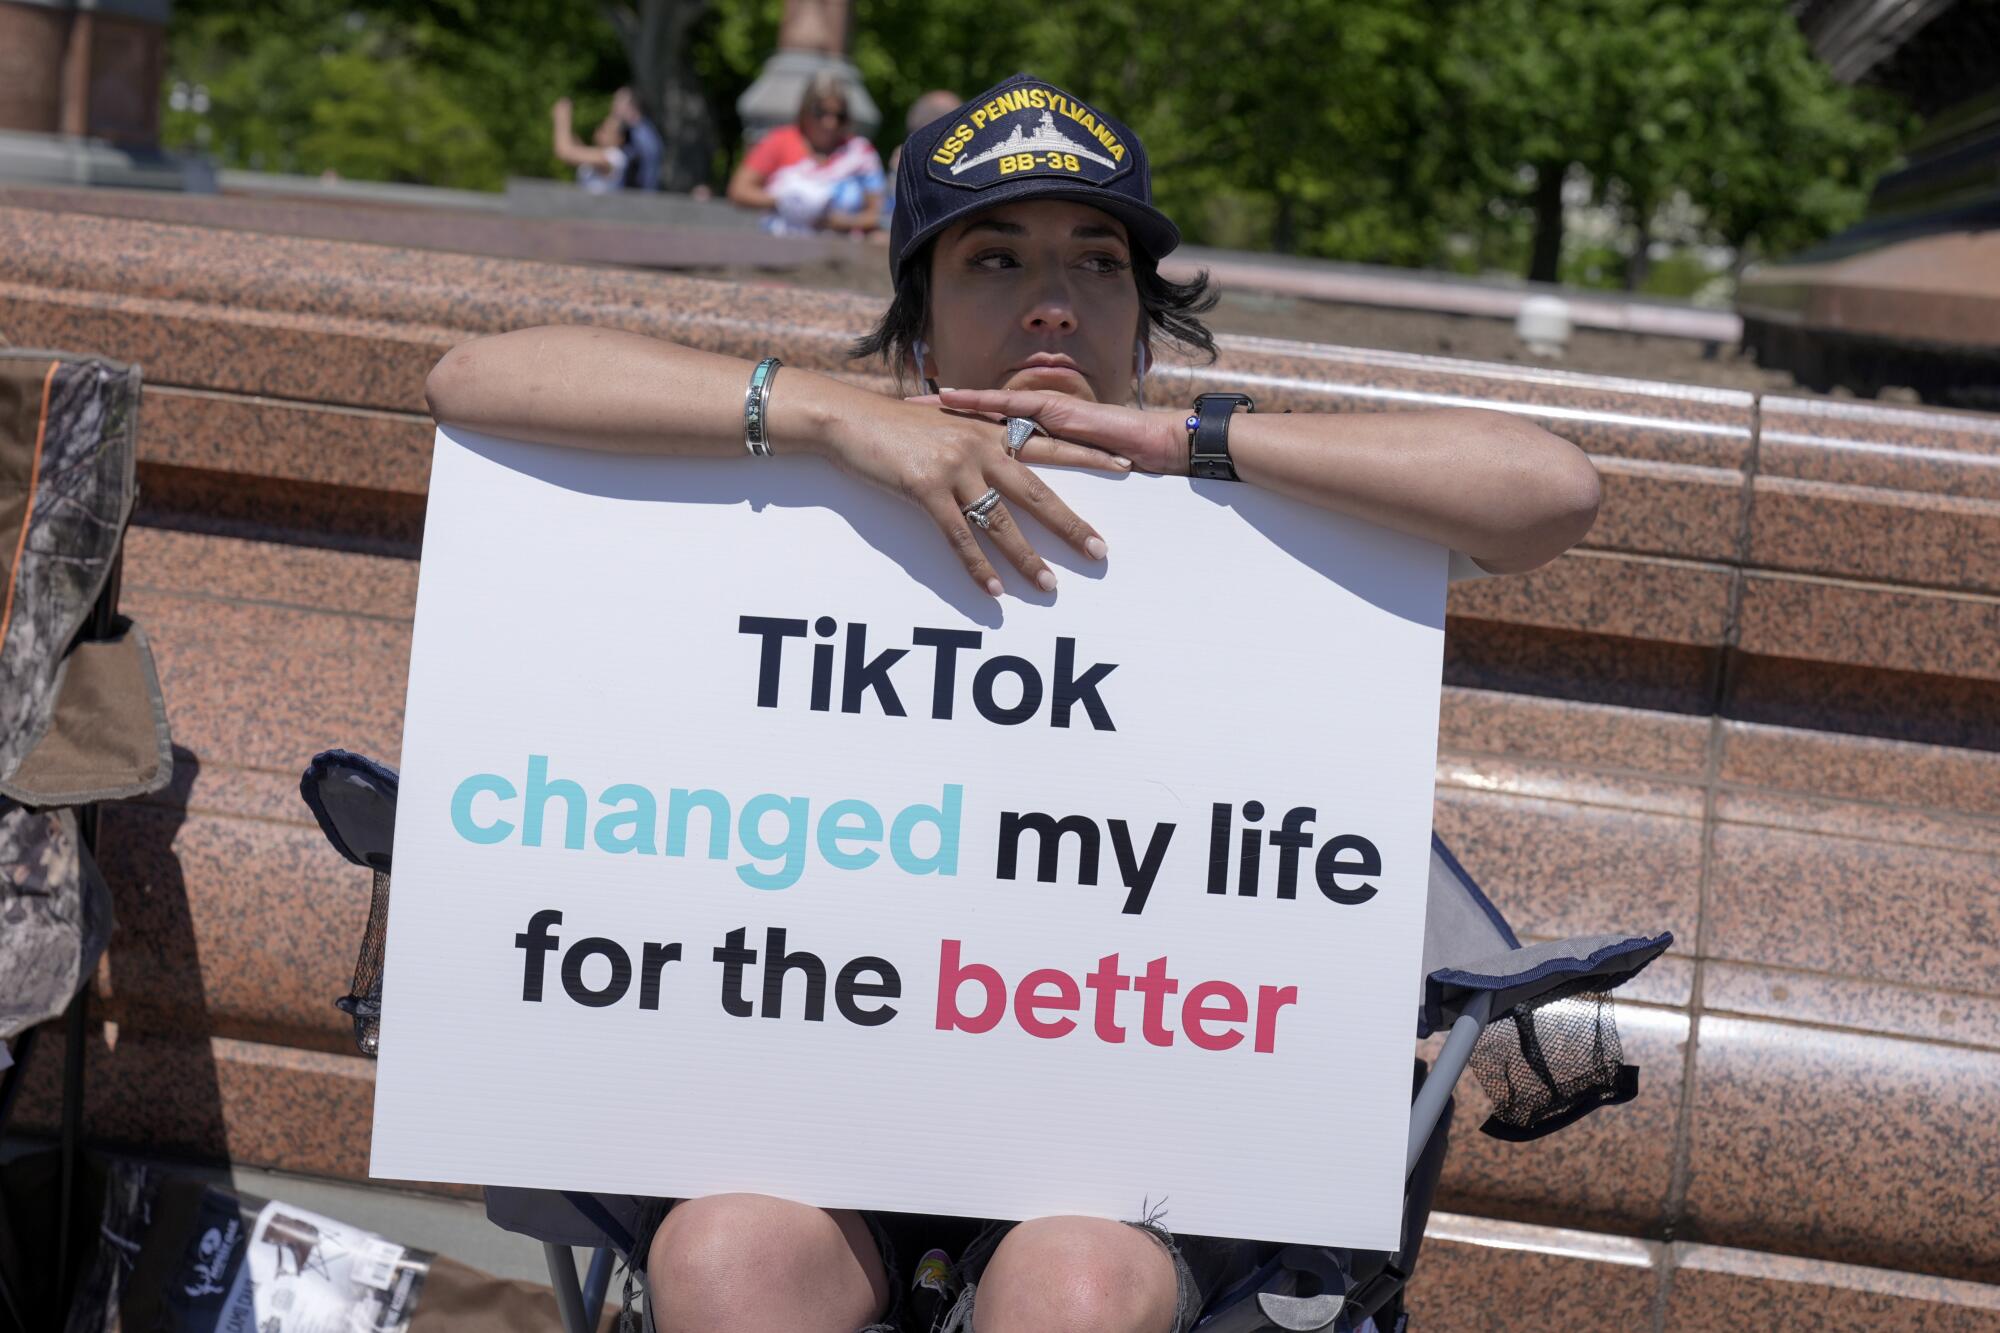 A person sitting in a folding chair with a sign reading, "TikTok changed my life for the better"